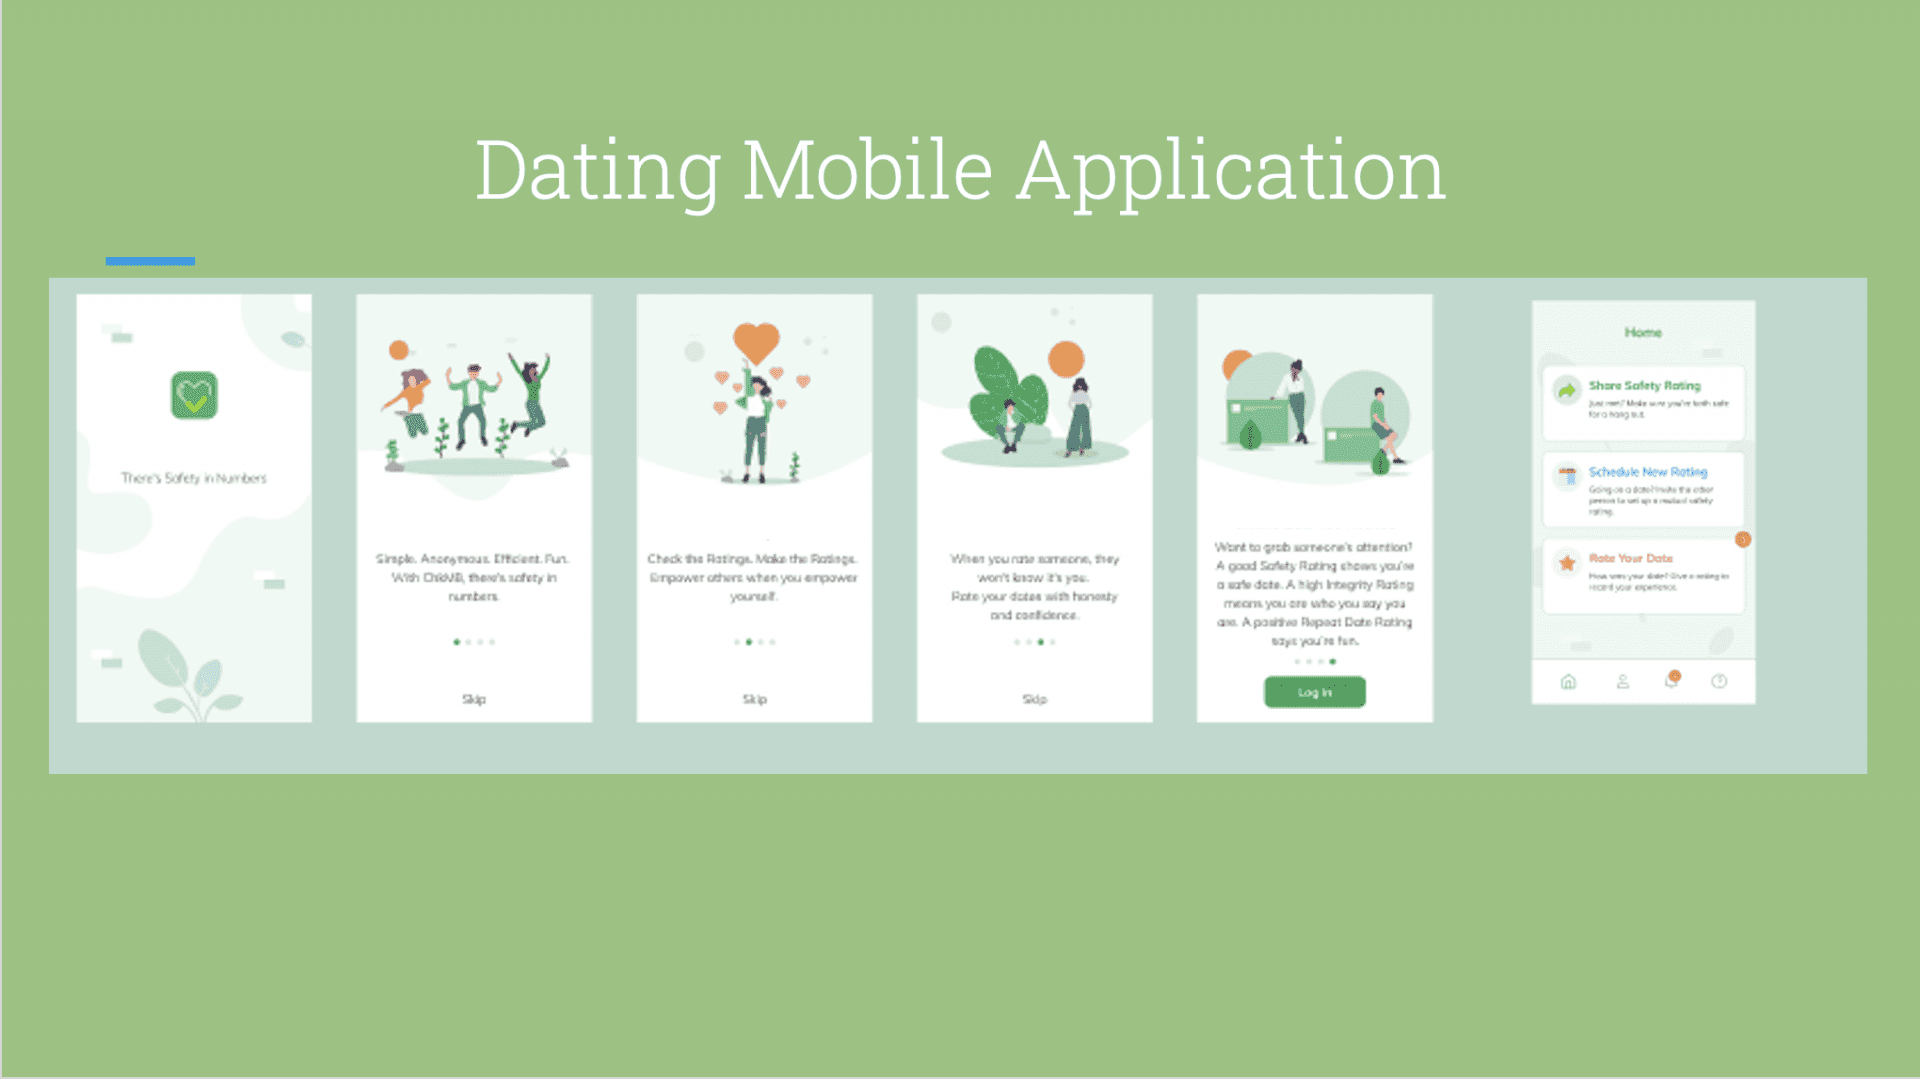 Dating mobile application